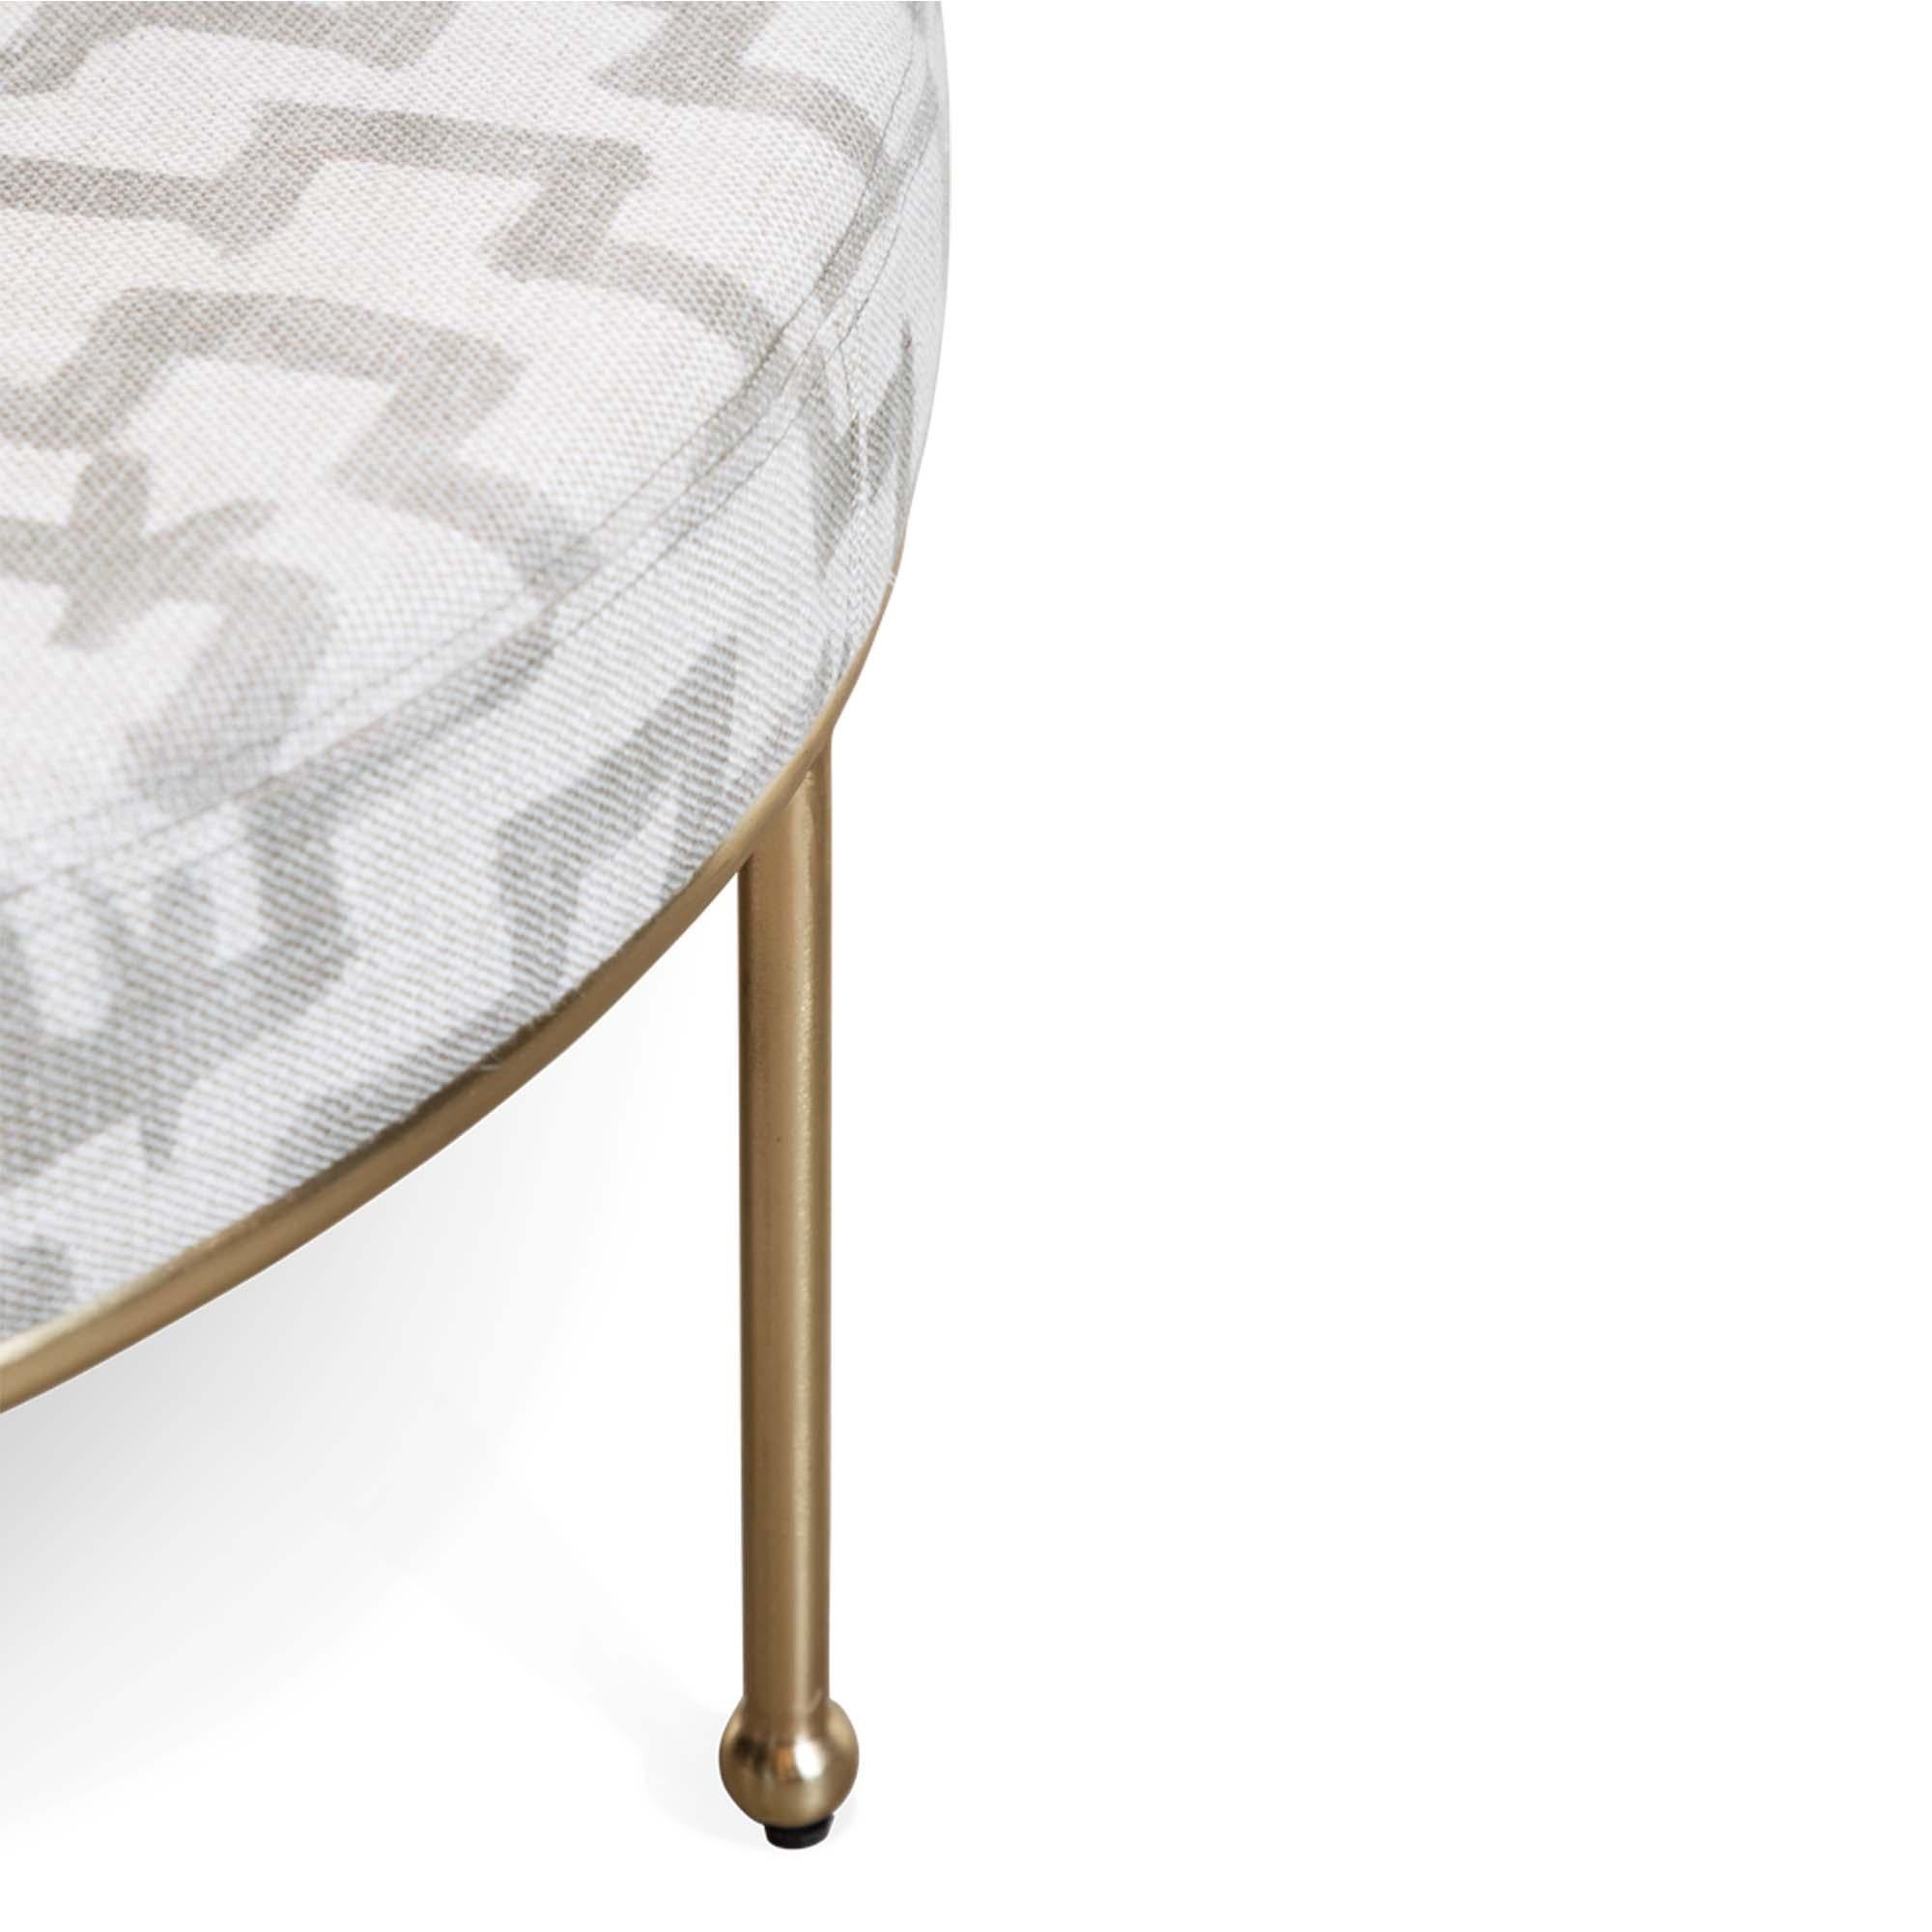 Satin Brass Orsini ottoman by Lawson-Fenning. The Orsini Ottoman features a brushed brass base with cap feet and an upholstered seat. Shown here with satin brass base and upholstered in Zak + Fox 